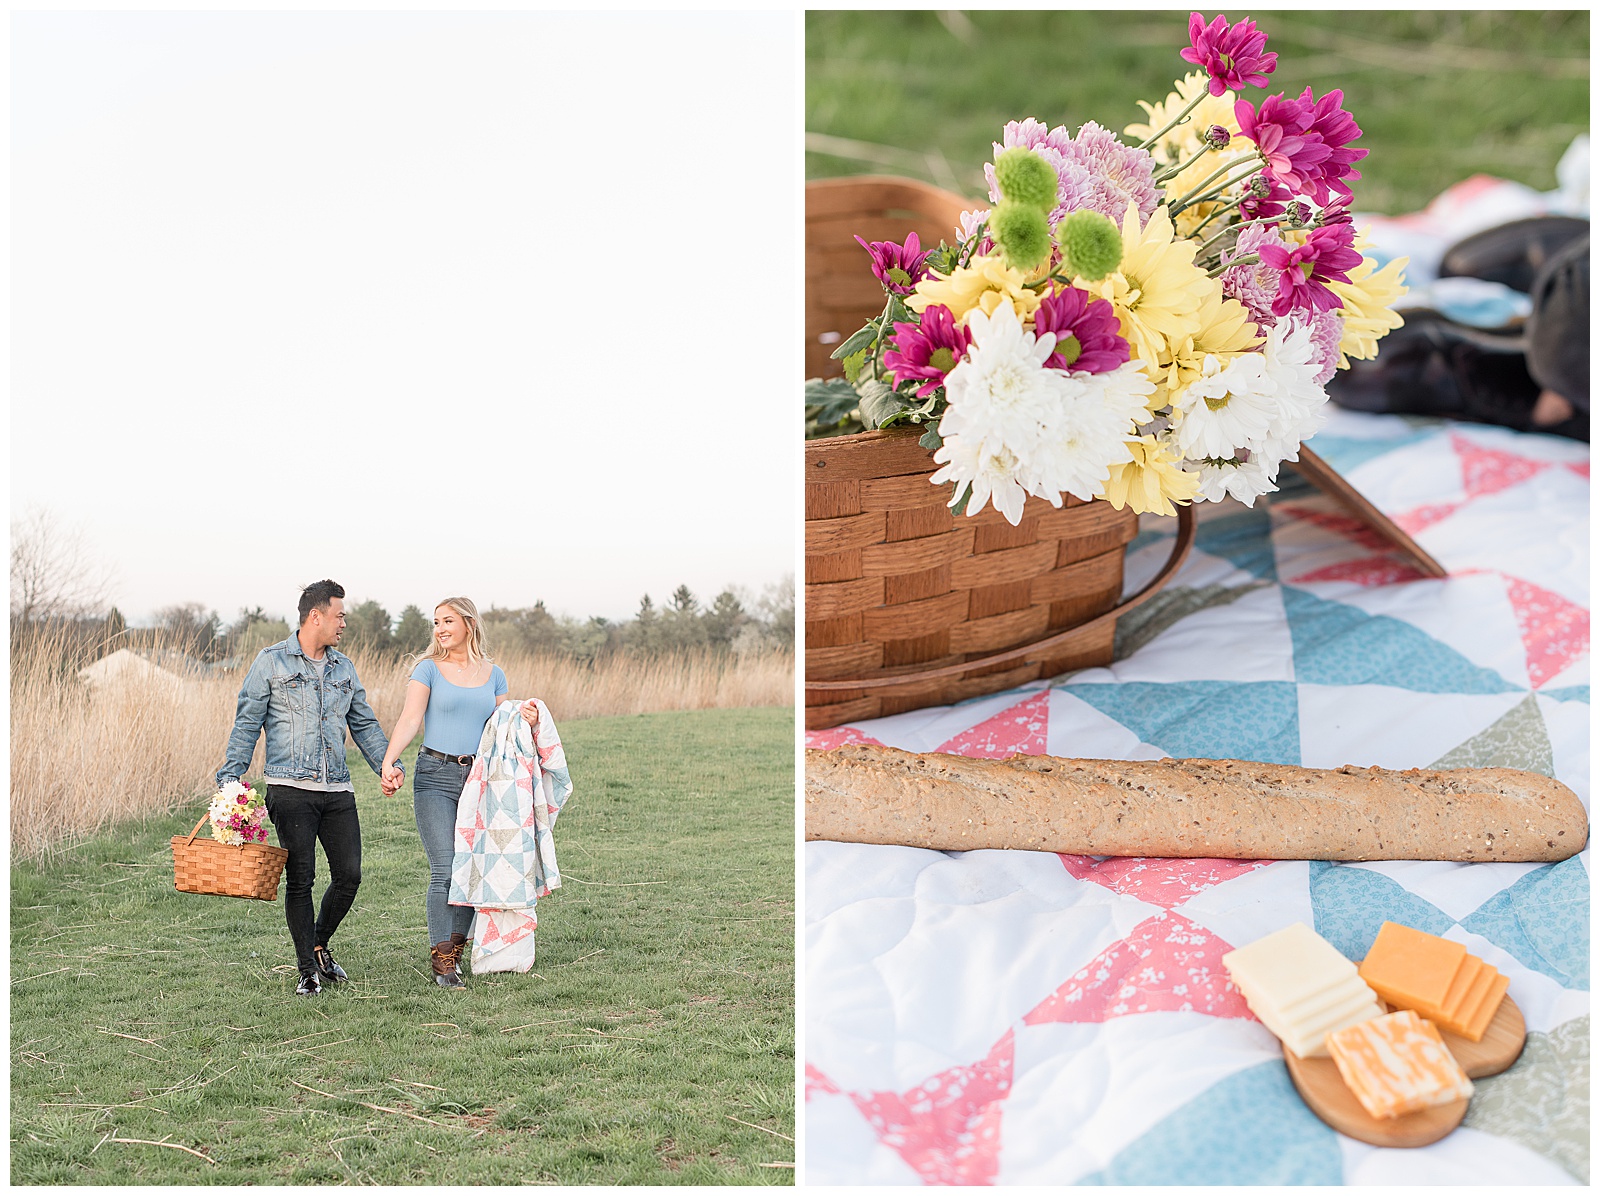 couple carries supplies for picnic including vintage quilt and basket on sunny evening